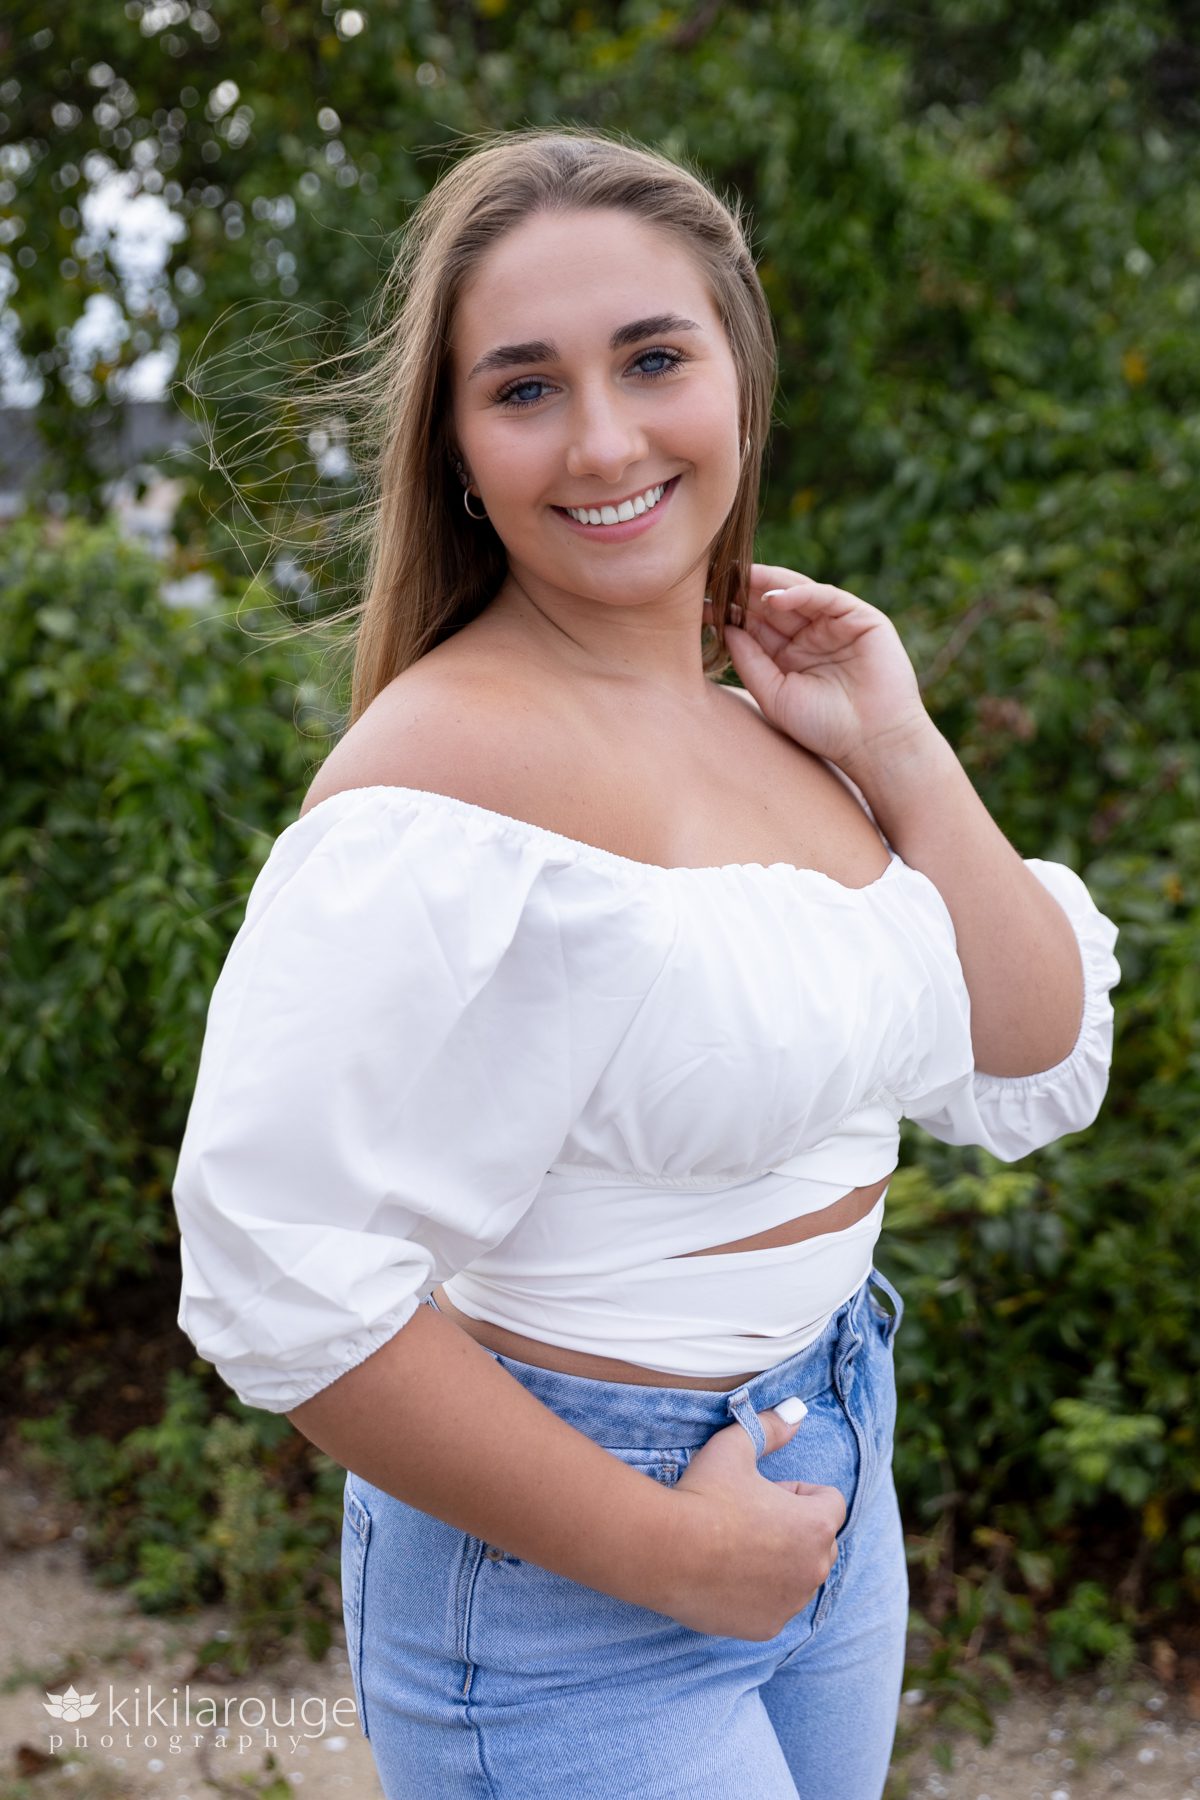 Triton Senior Portrait Girl in Jeans with white top tied in back at beach